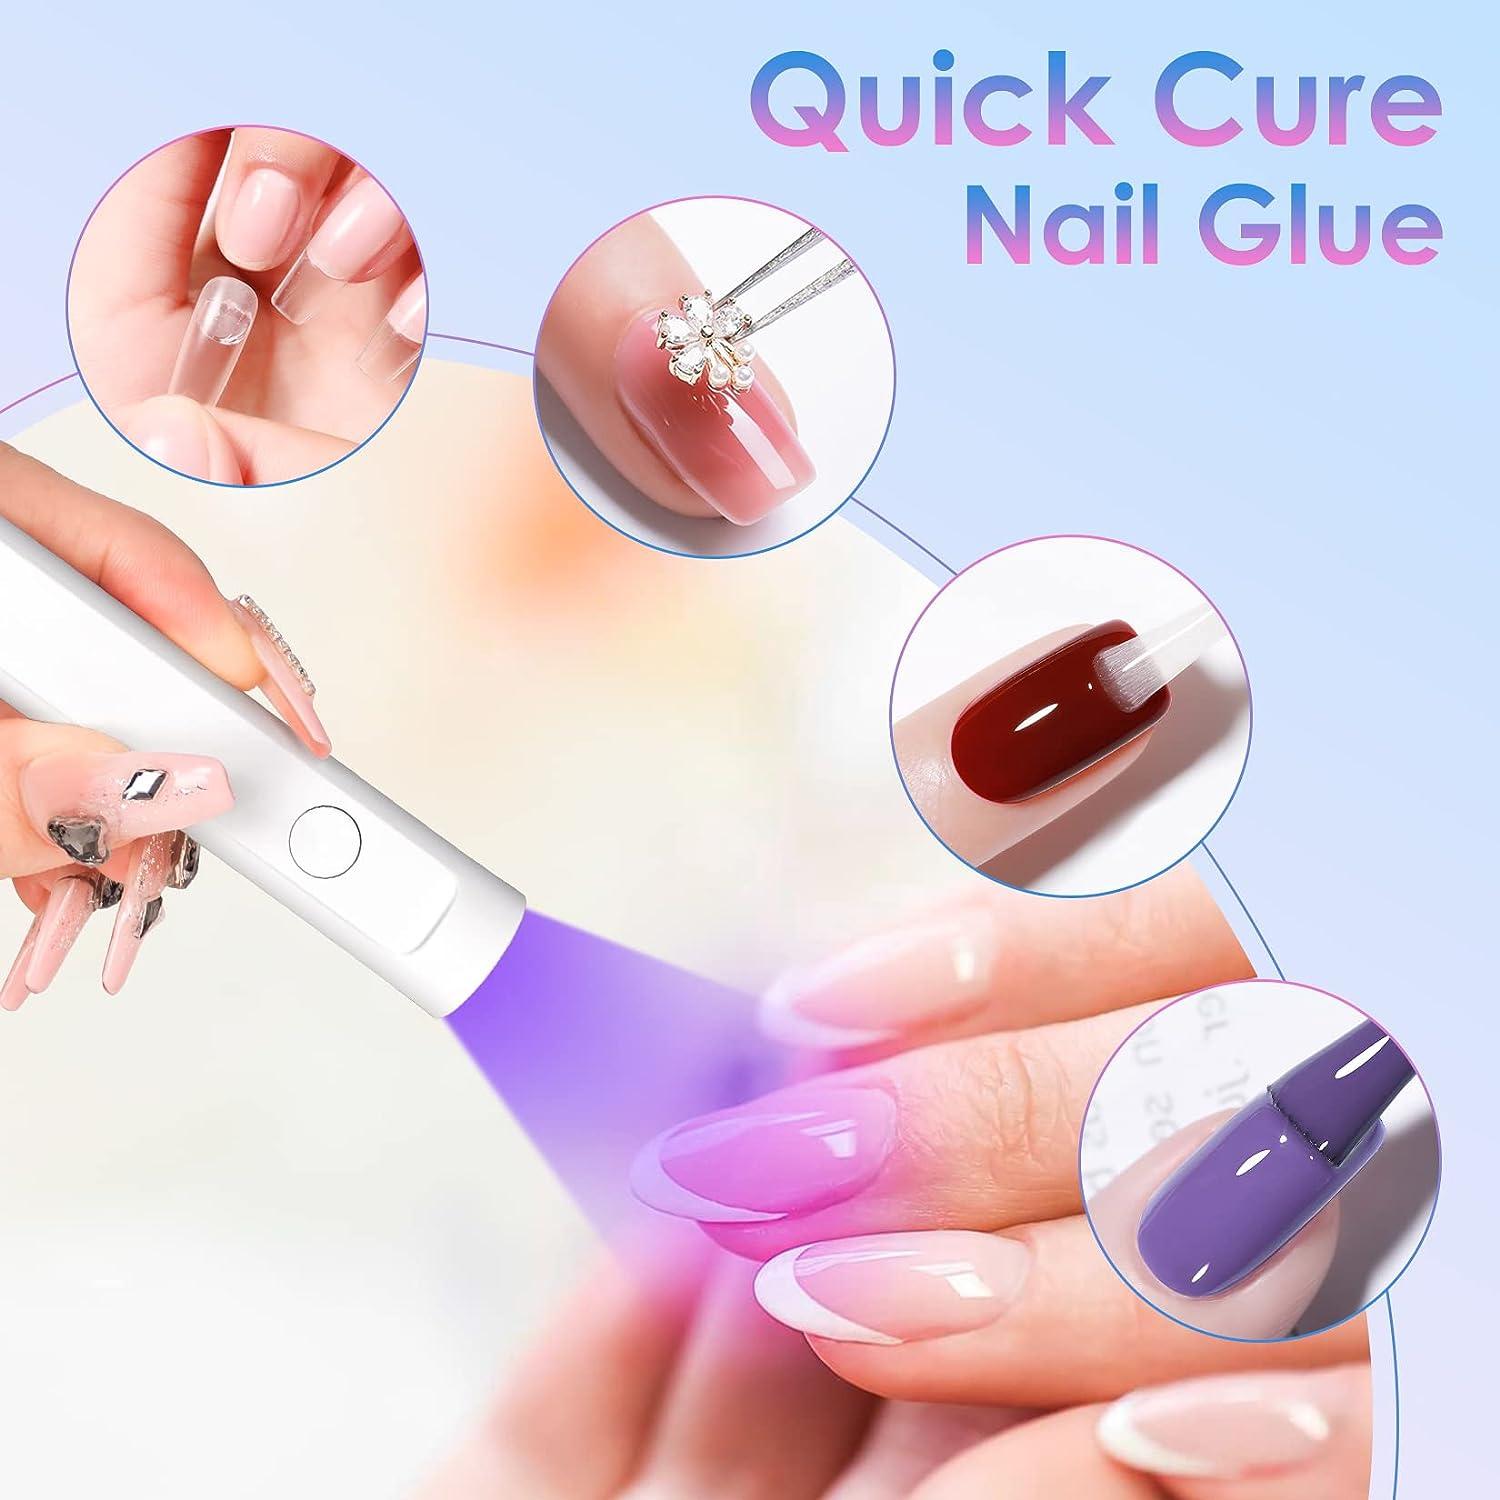 UV Lamp Light for curing - Nails